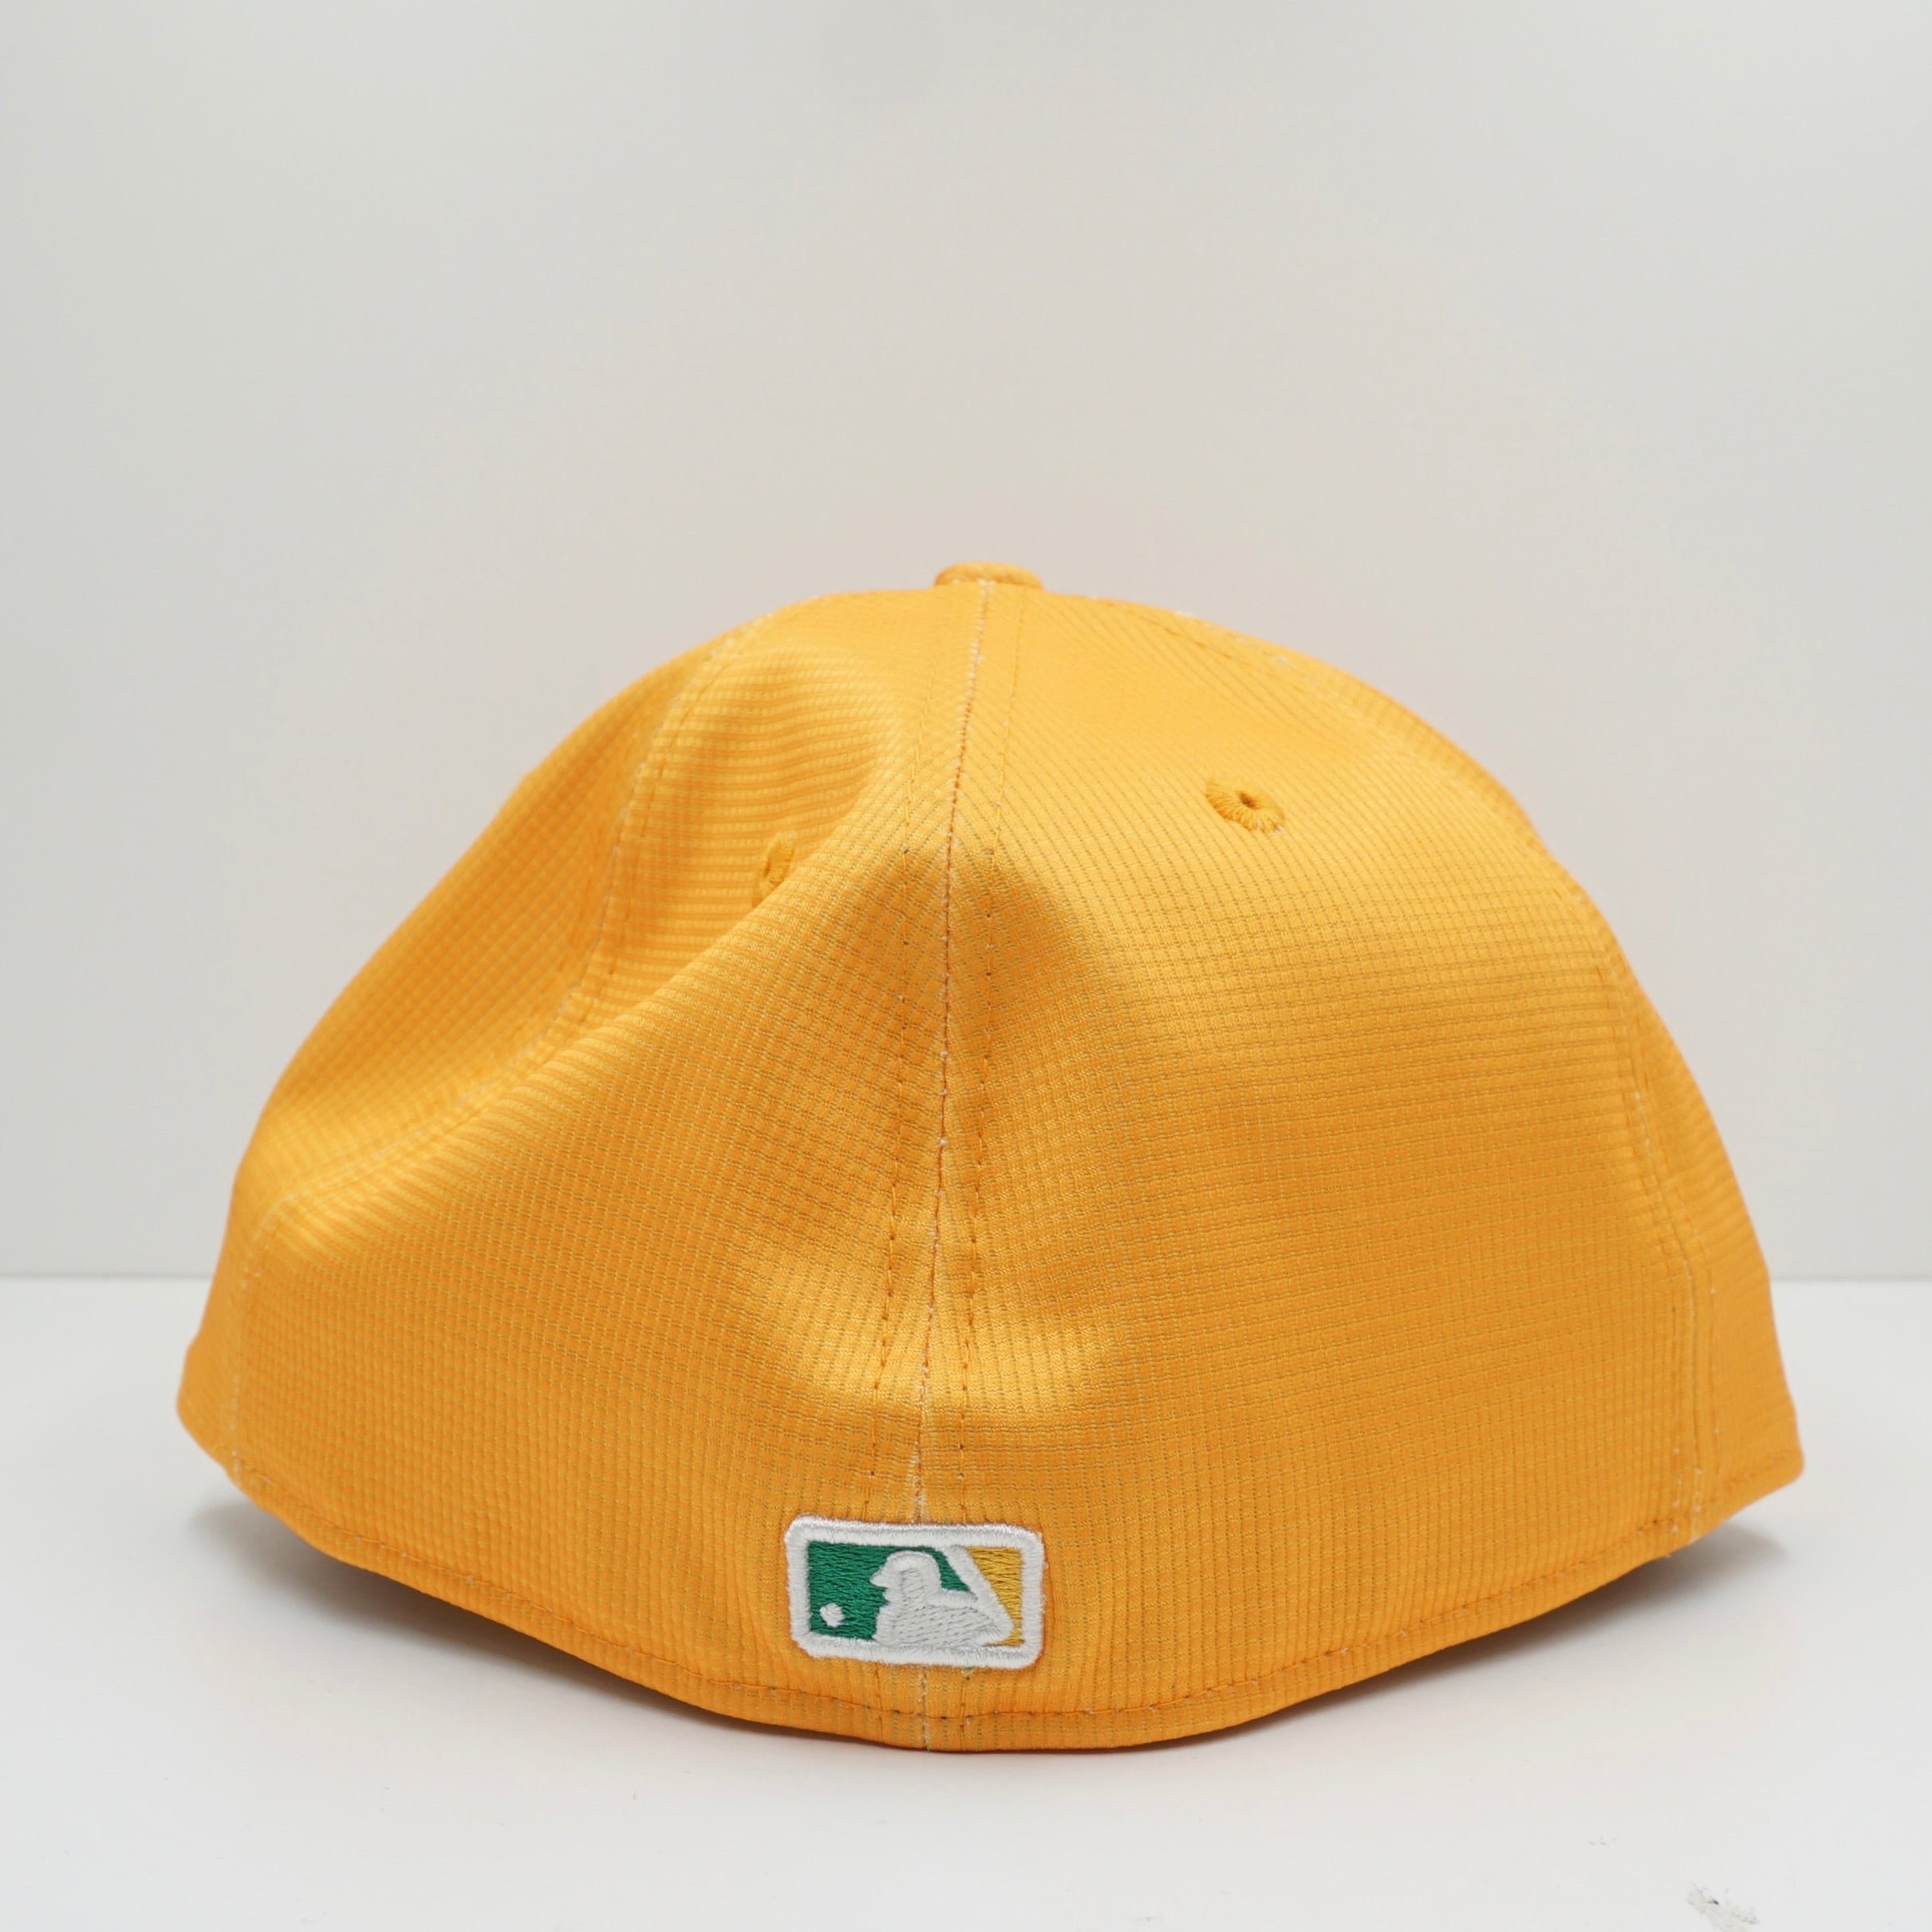 New Era Spring Training Oakland A's Fitted Cap